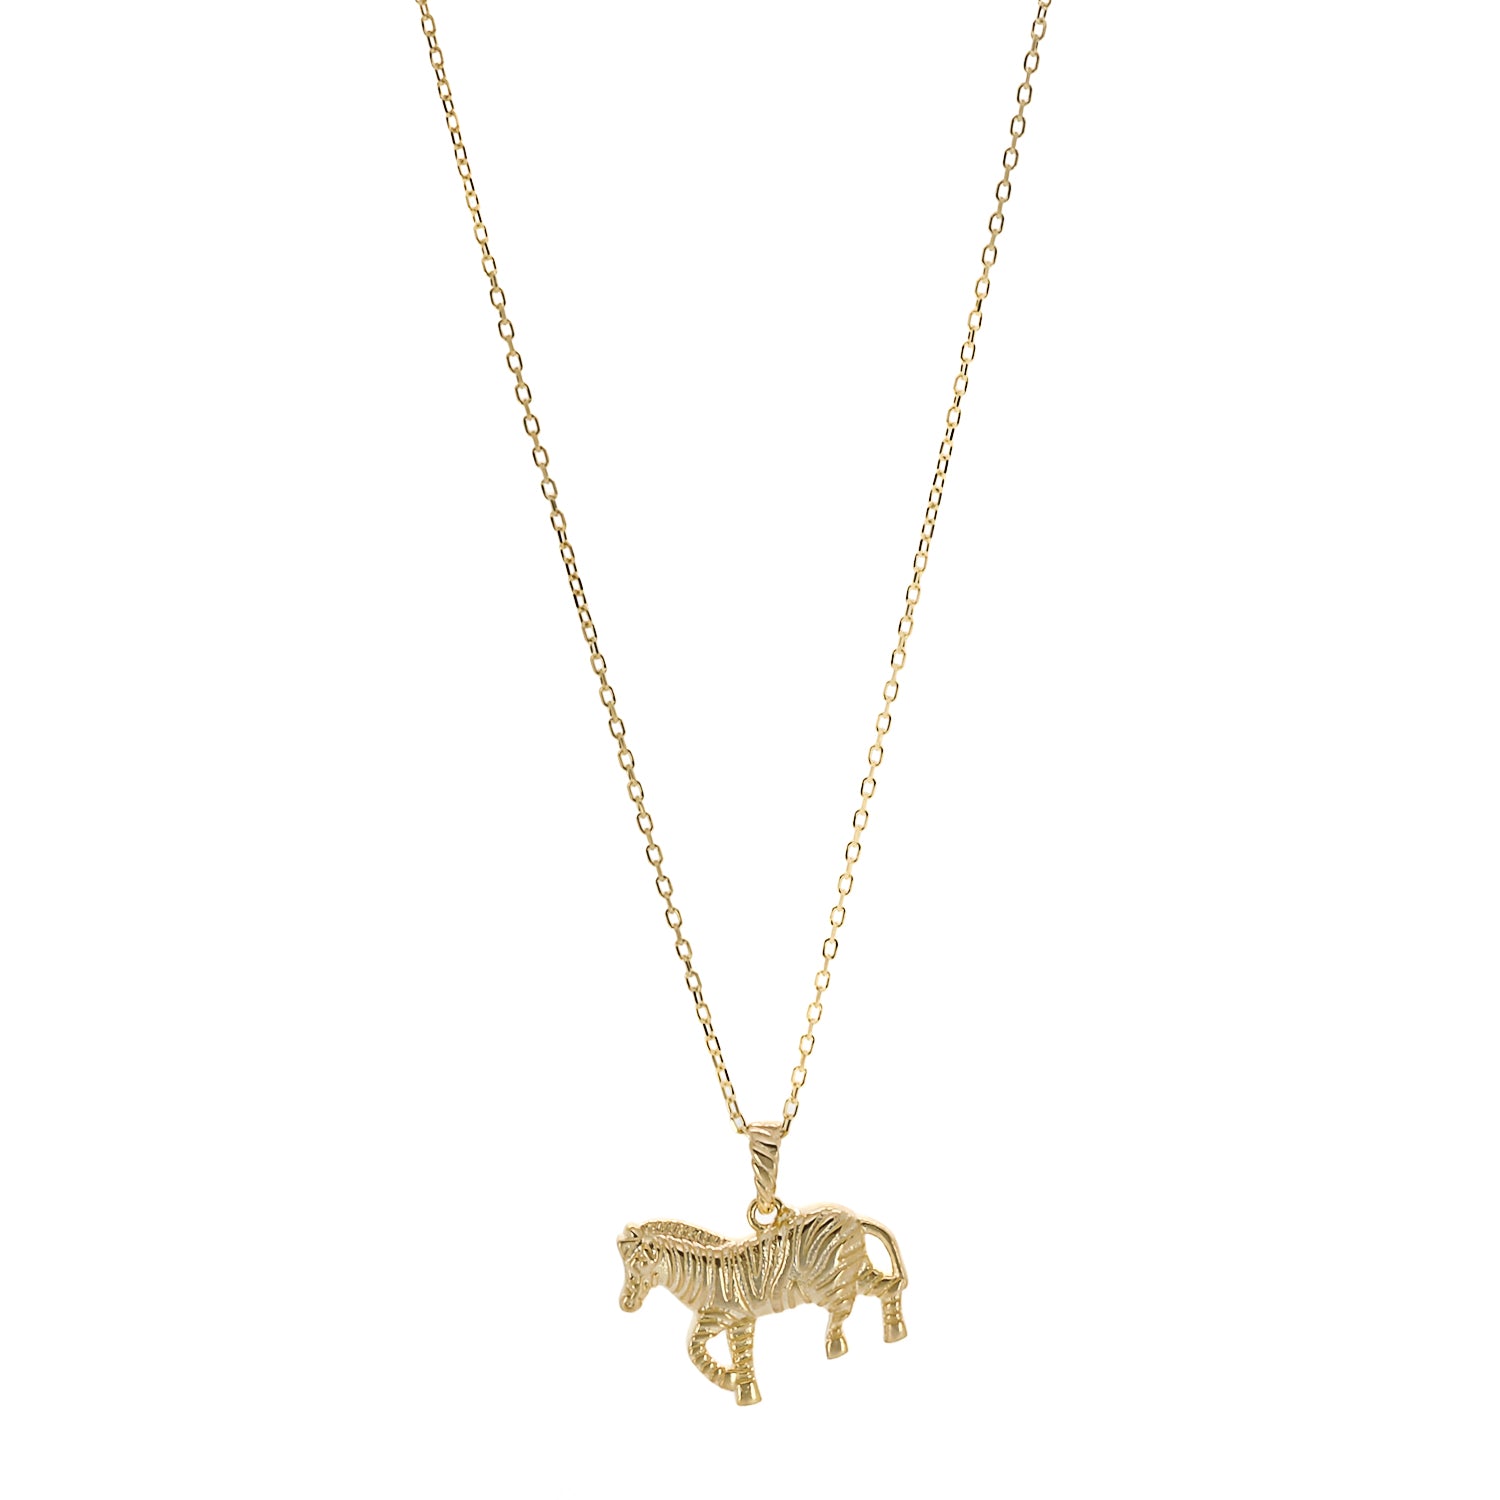 The Gold Zebra Necklace, a symbol of grace and style, perfect for adding a touch of uniqueness to any outfit.